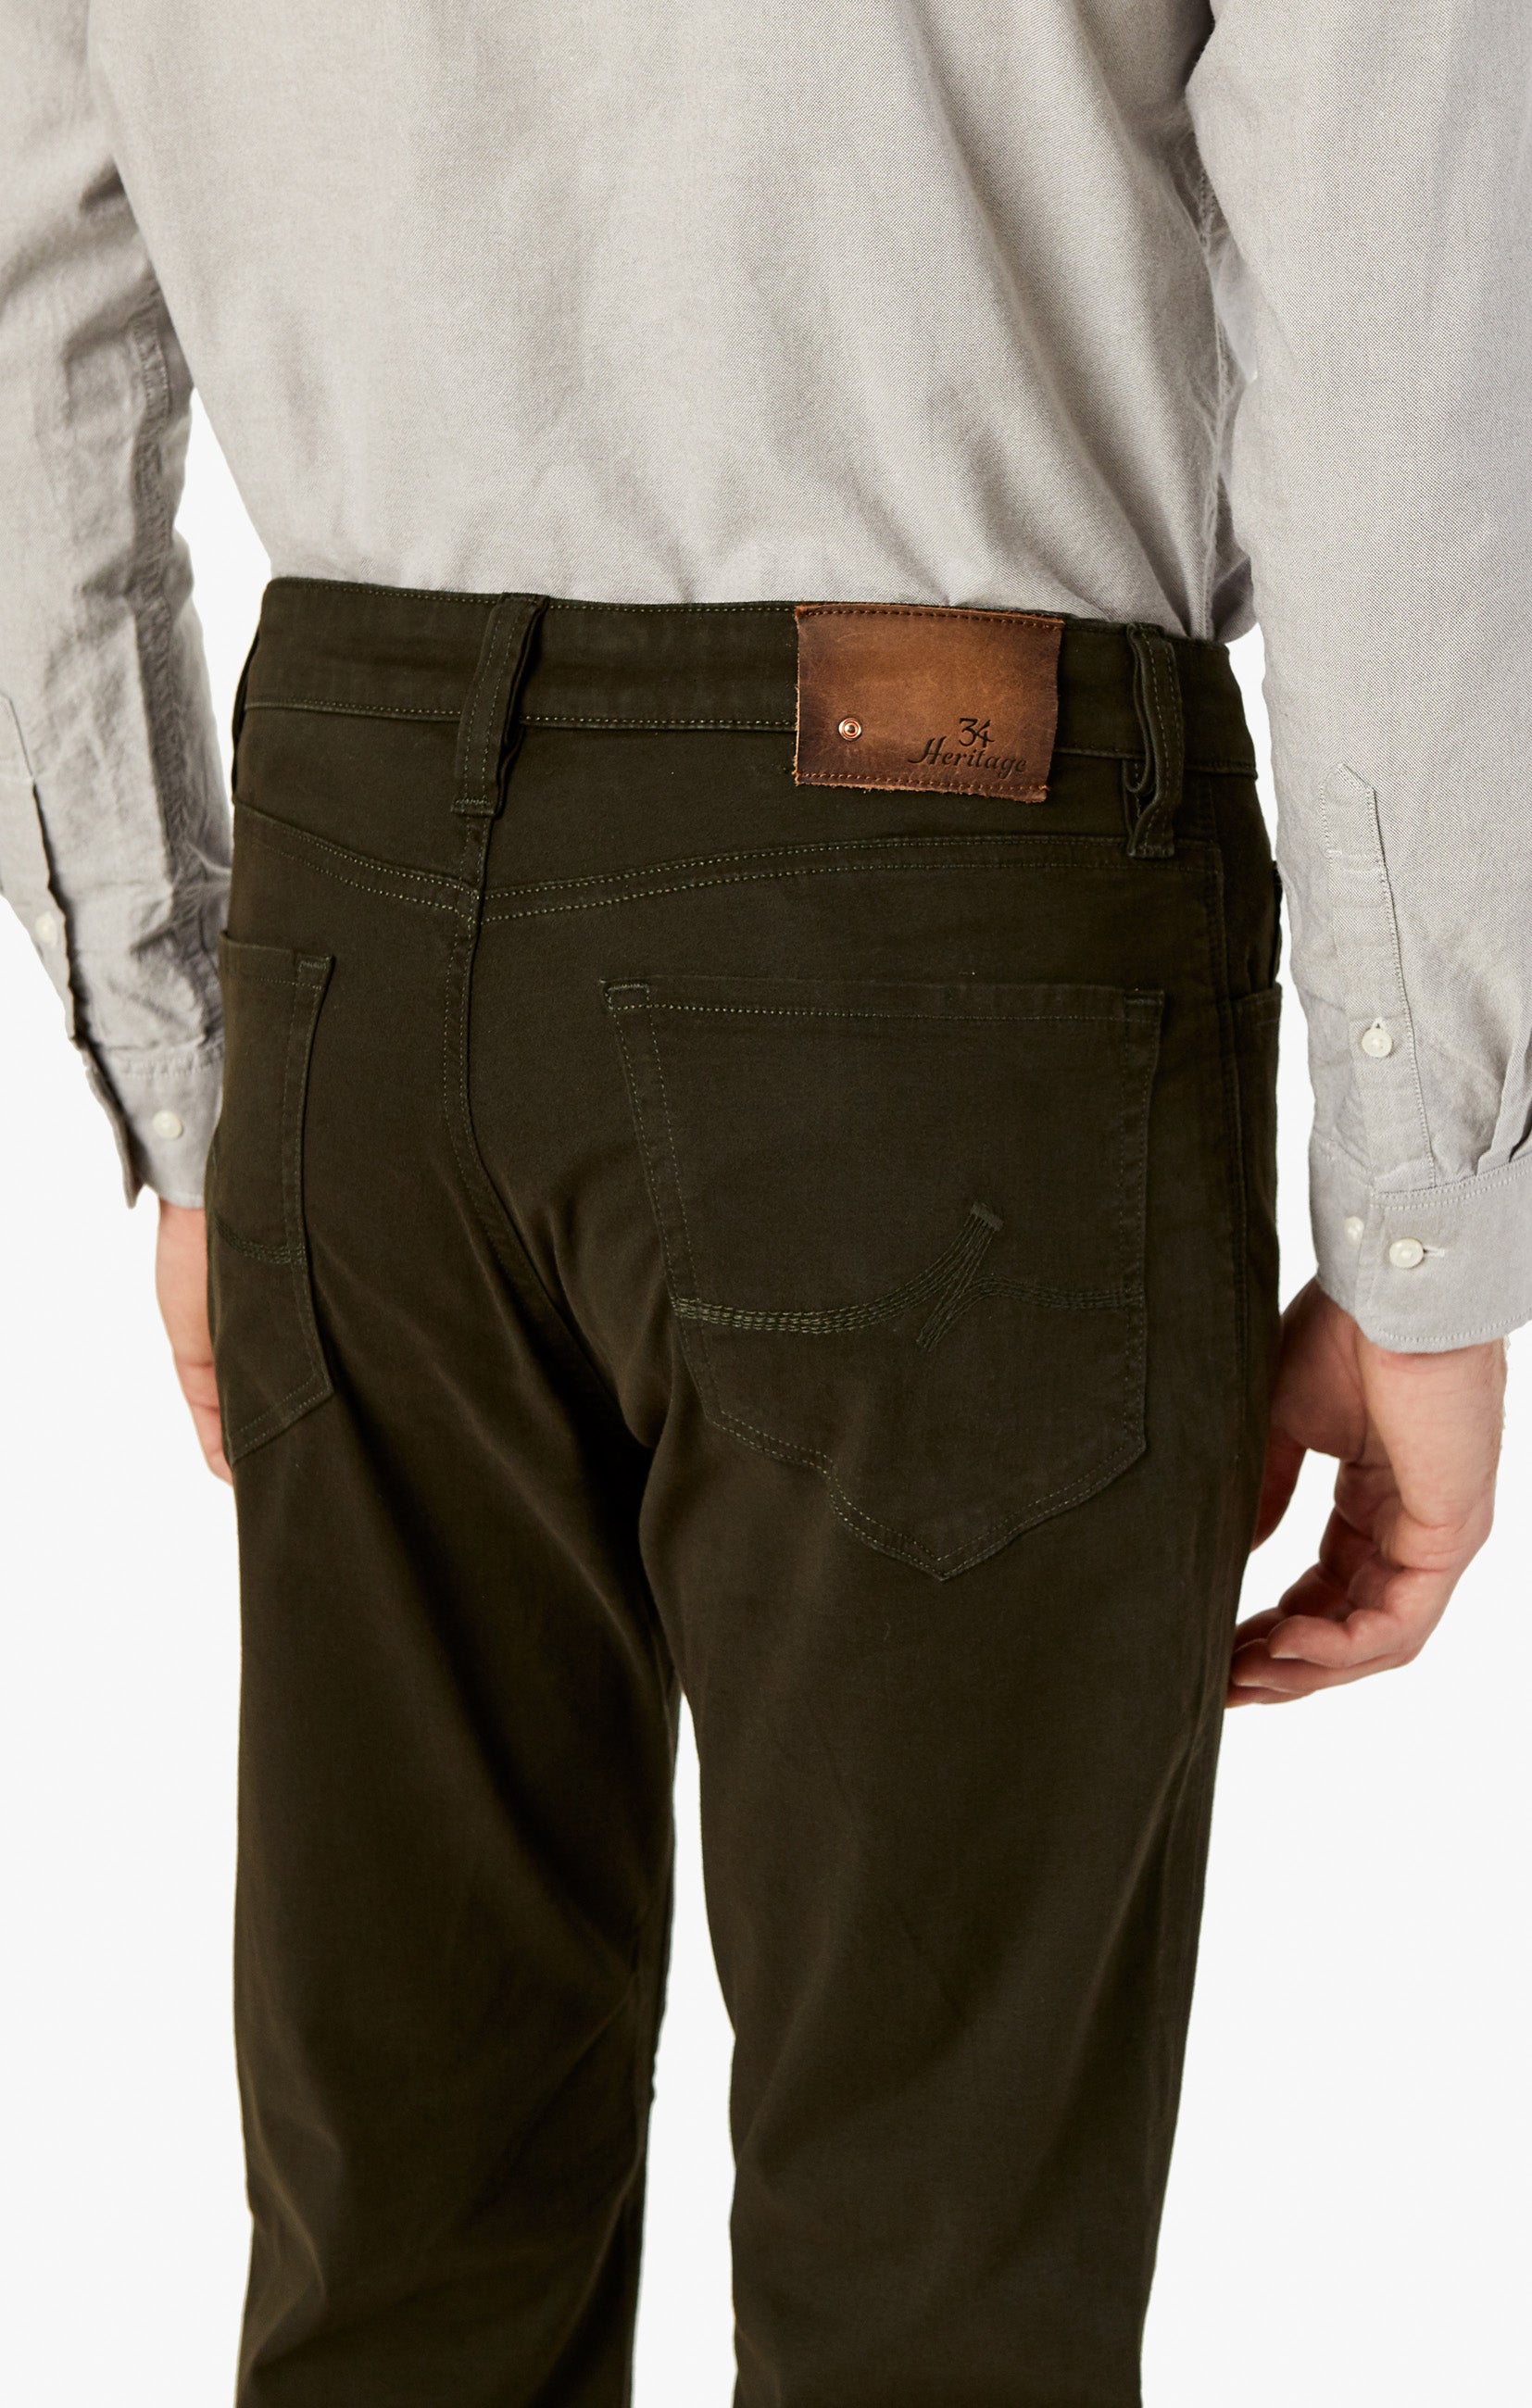 Charisma Relaxed Straight Pants in Dark Green Twill Image 8